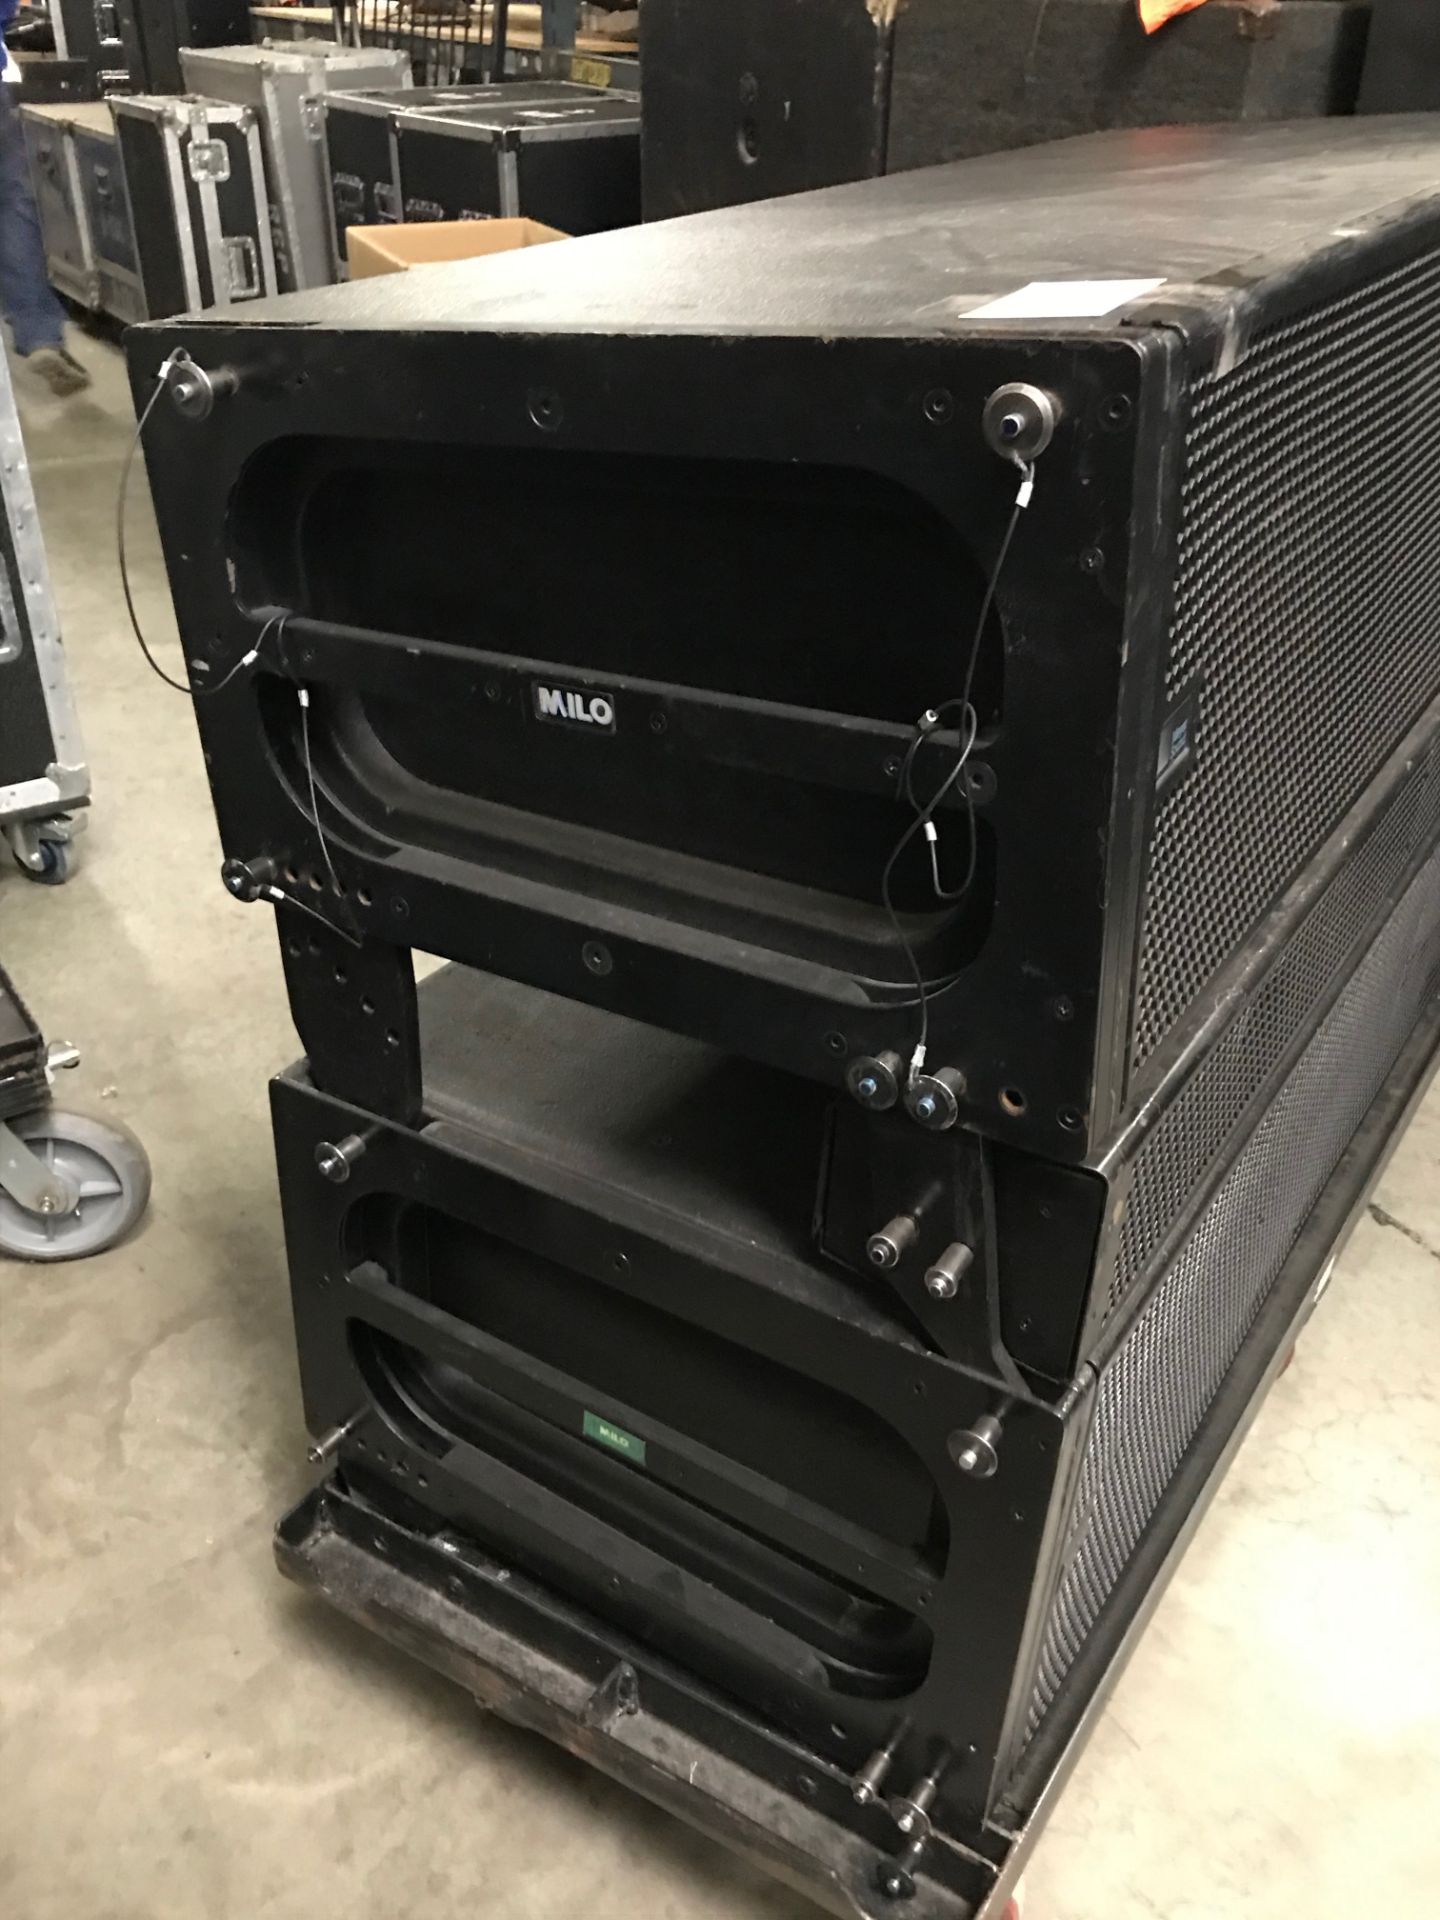 LOT OF: (2) MEYER SOUND, MILO HP MONITORS W CART AND ONE SPACER - Image 3 of 6